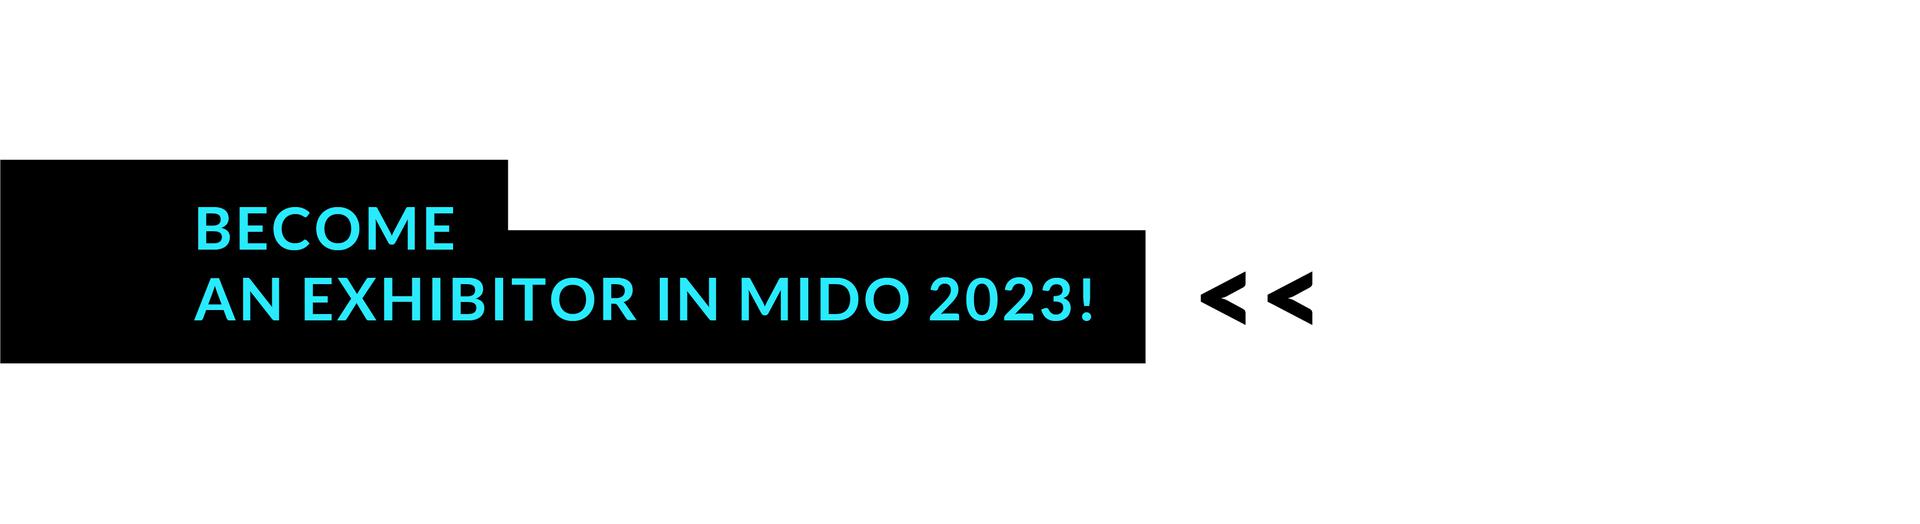 Become an exhibitor in MIDO 2023!